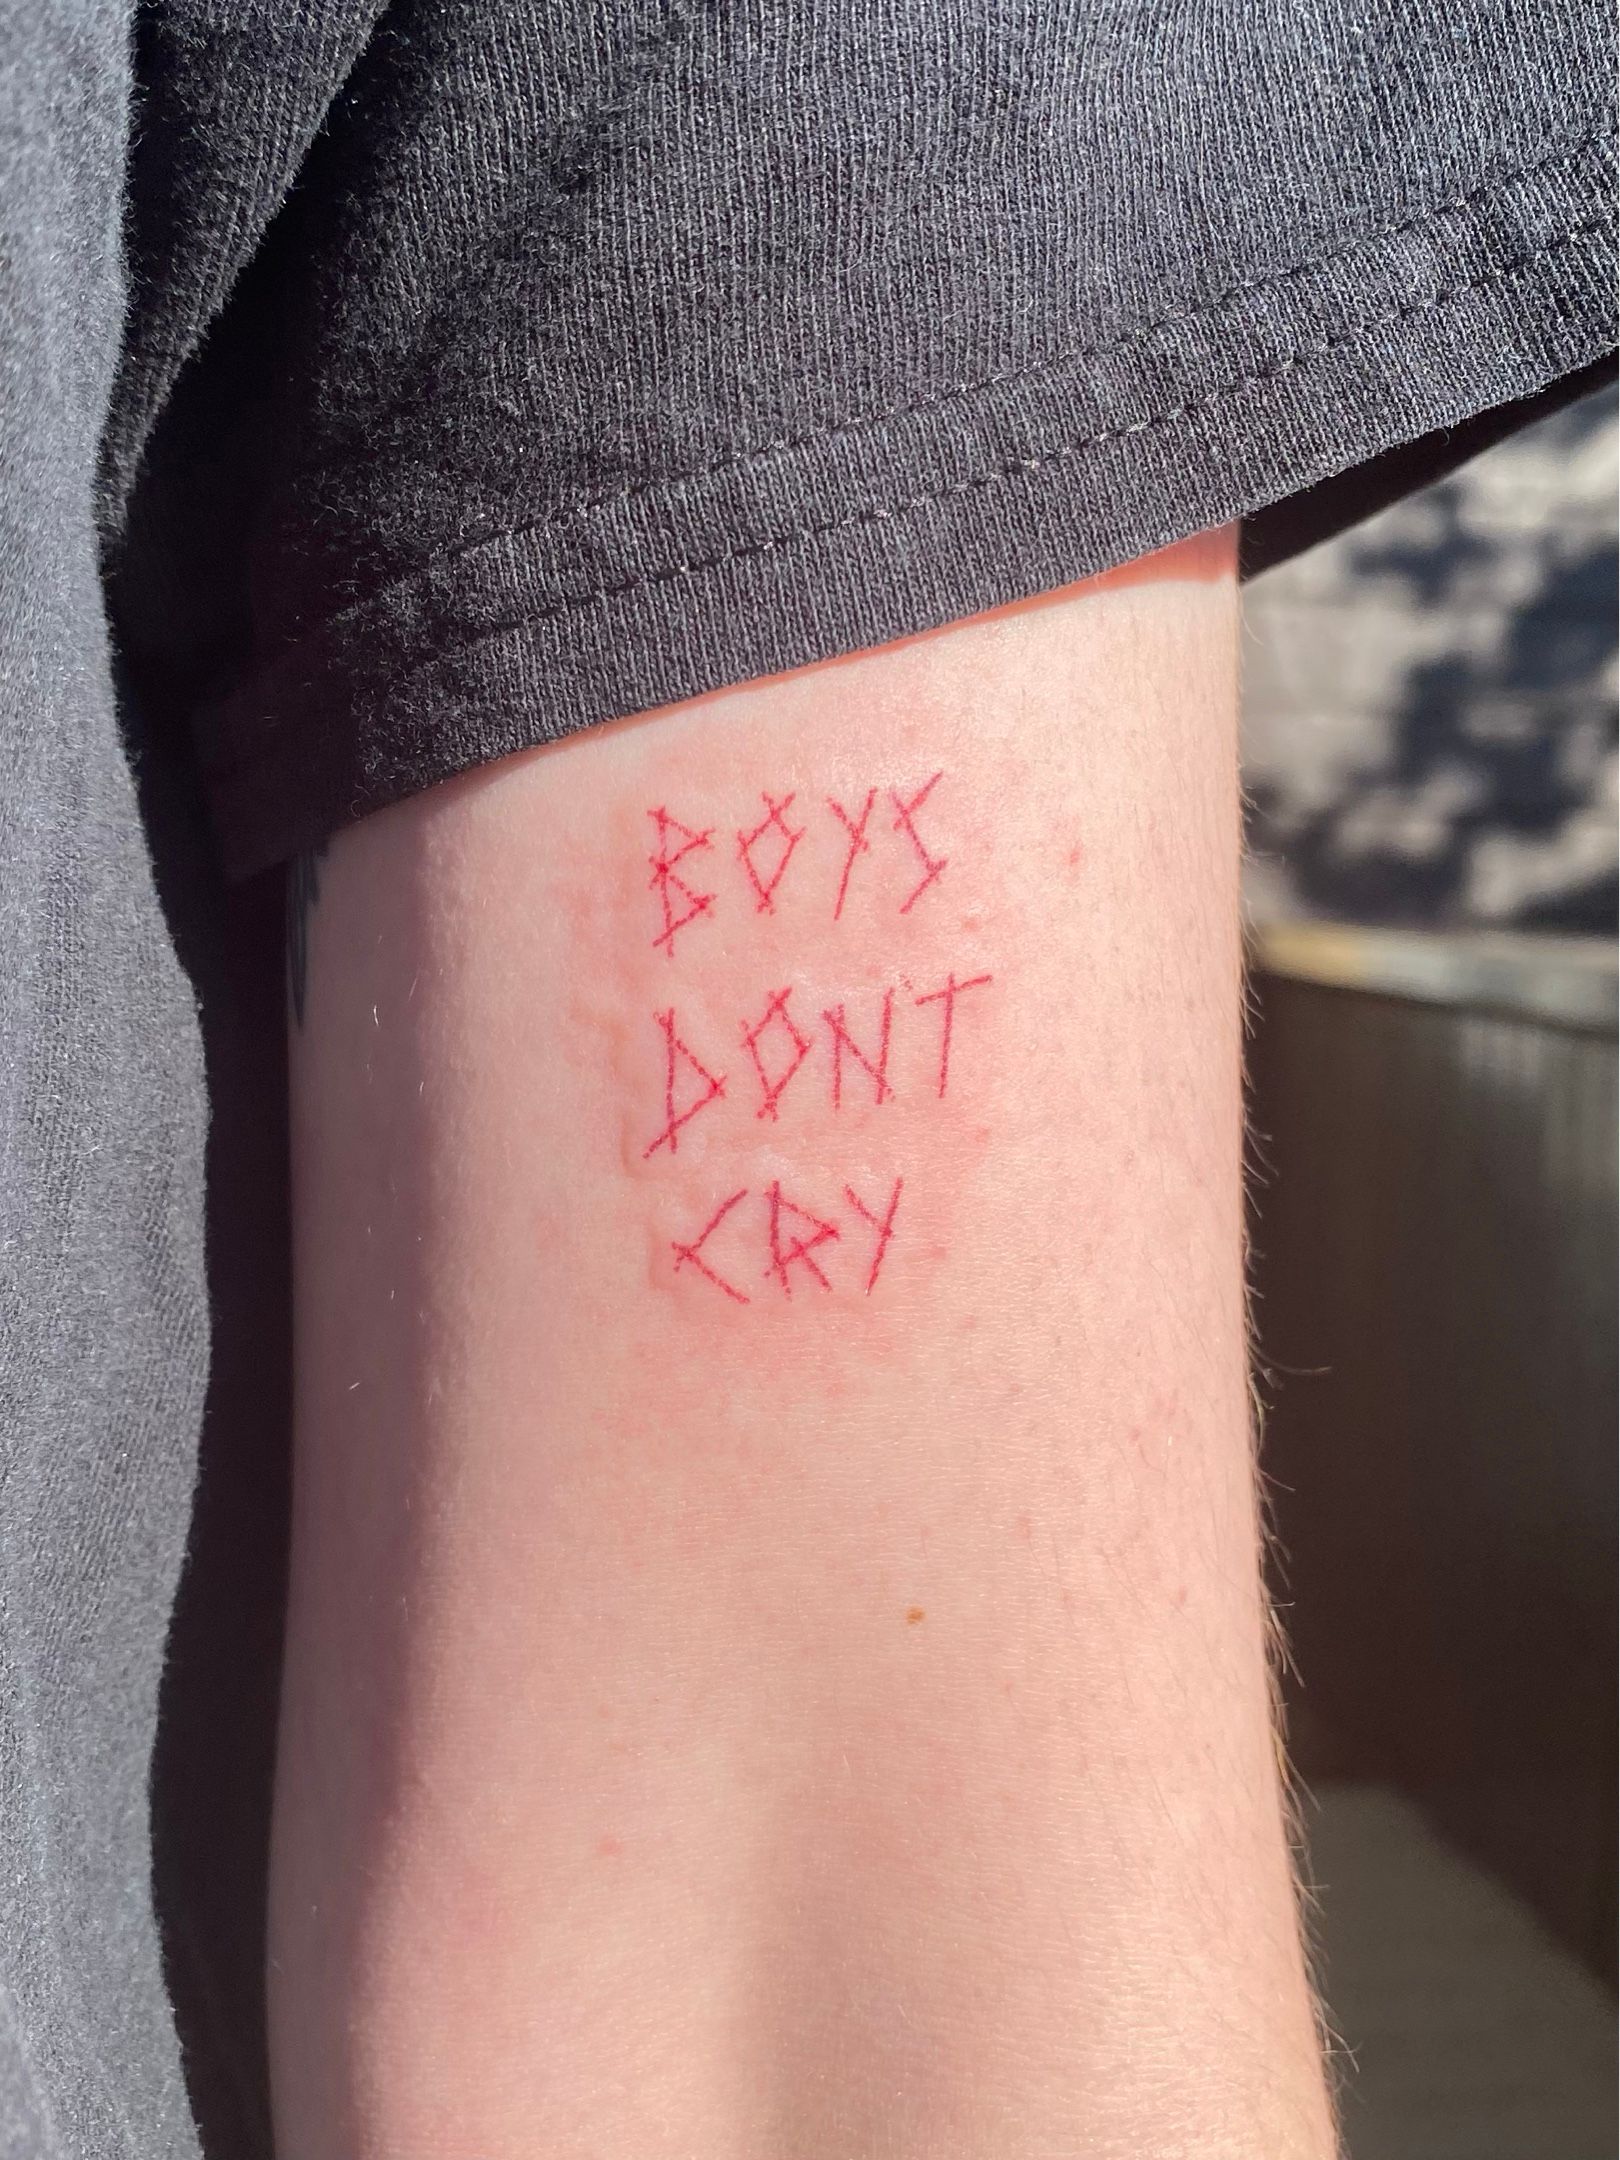 Tattoo uploaded by aaron • Boys Don't Cry. Frank Ocean inspired